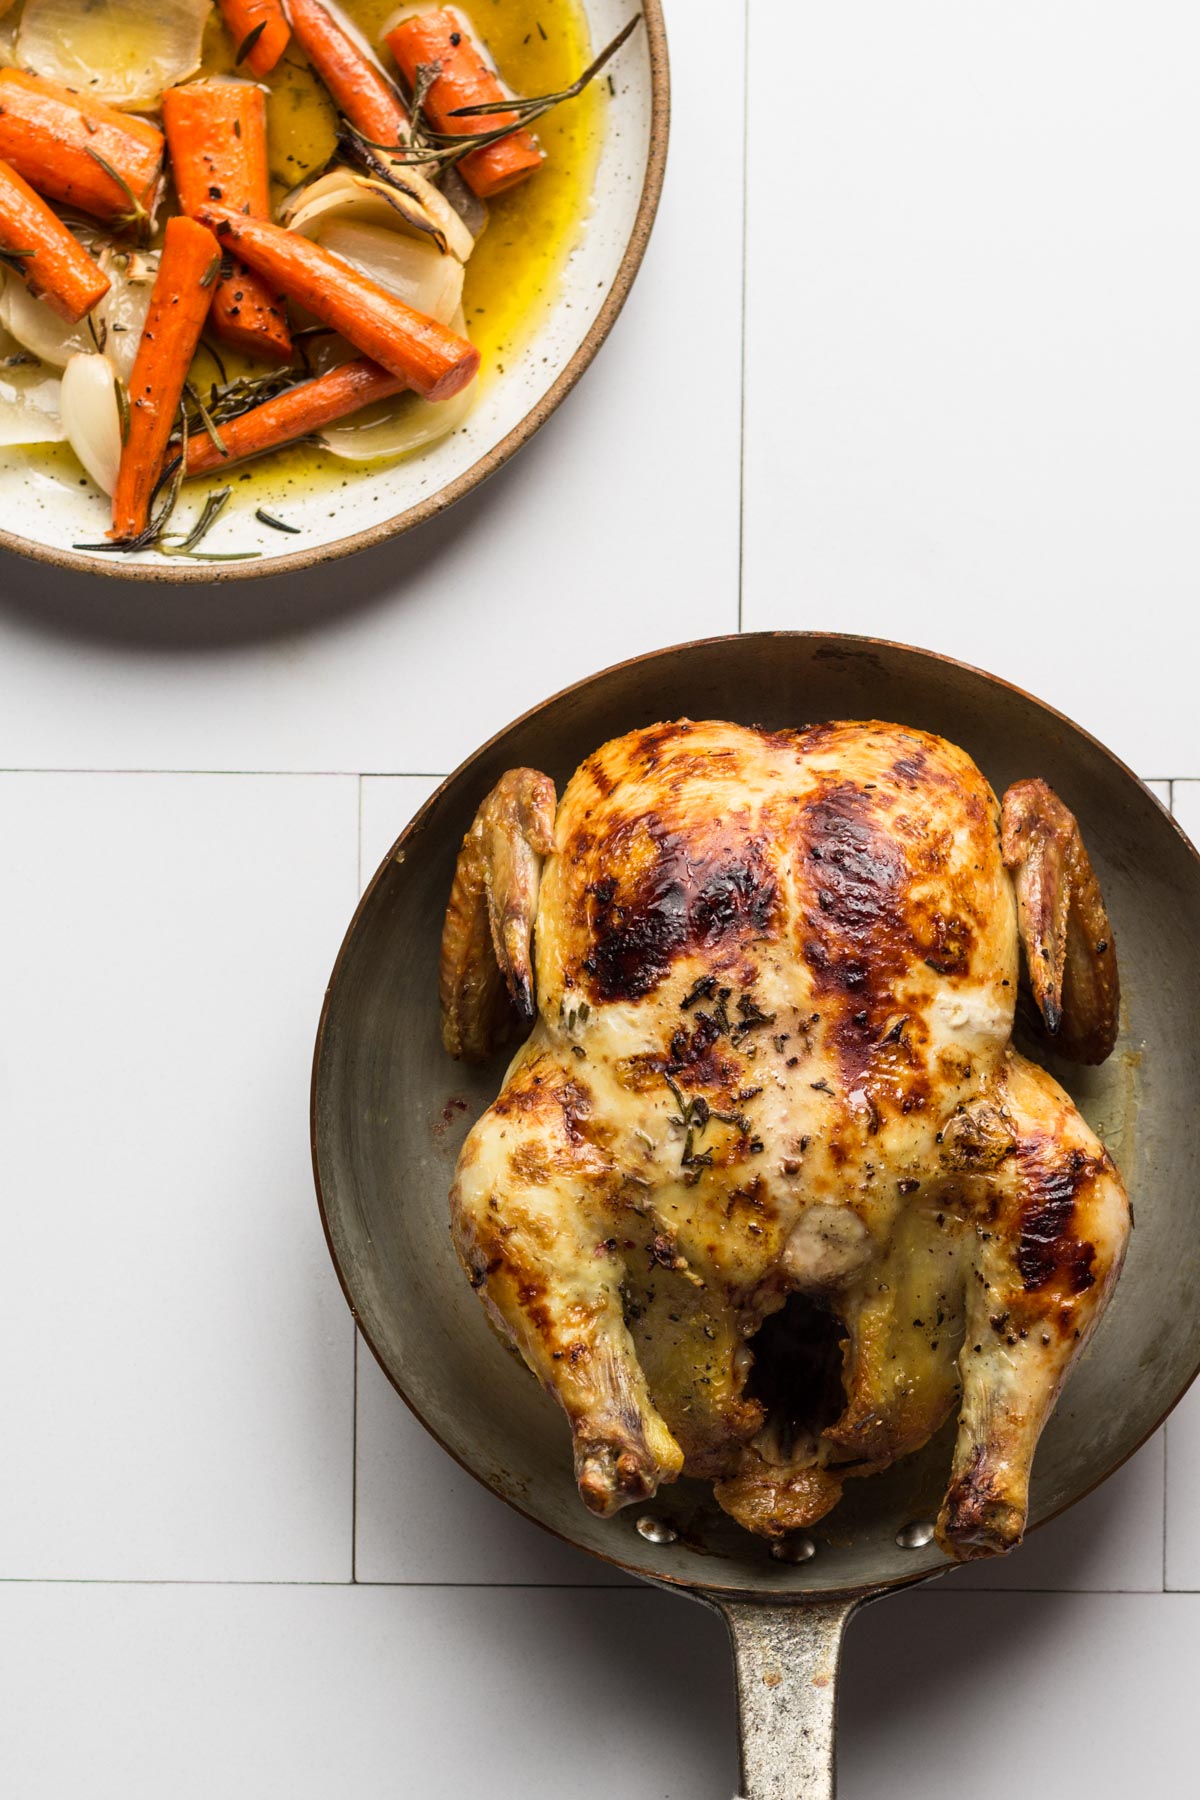 Classic Roast Chicken Recipe (Step-by-Step Video!)